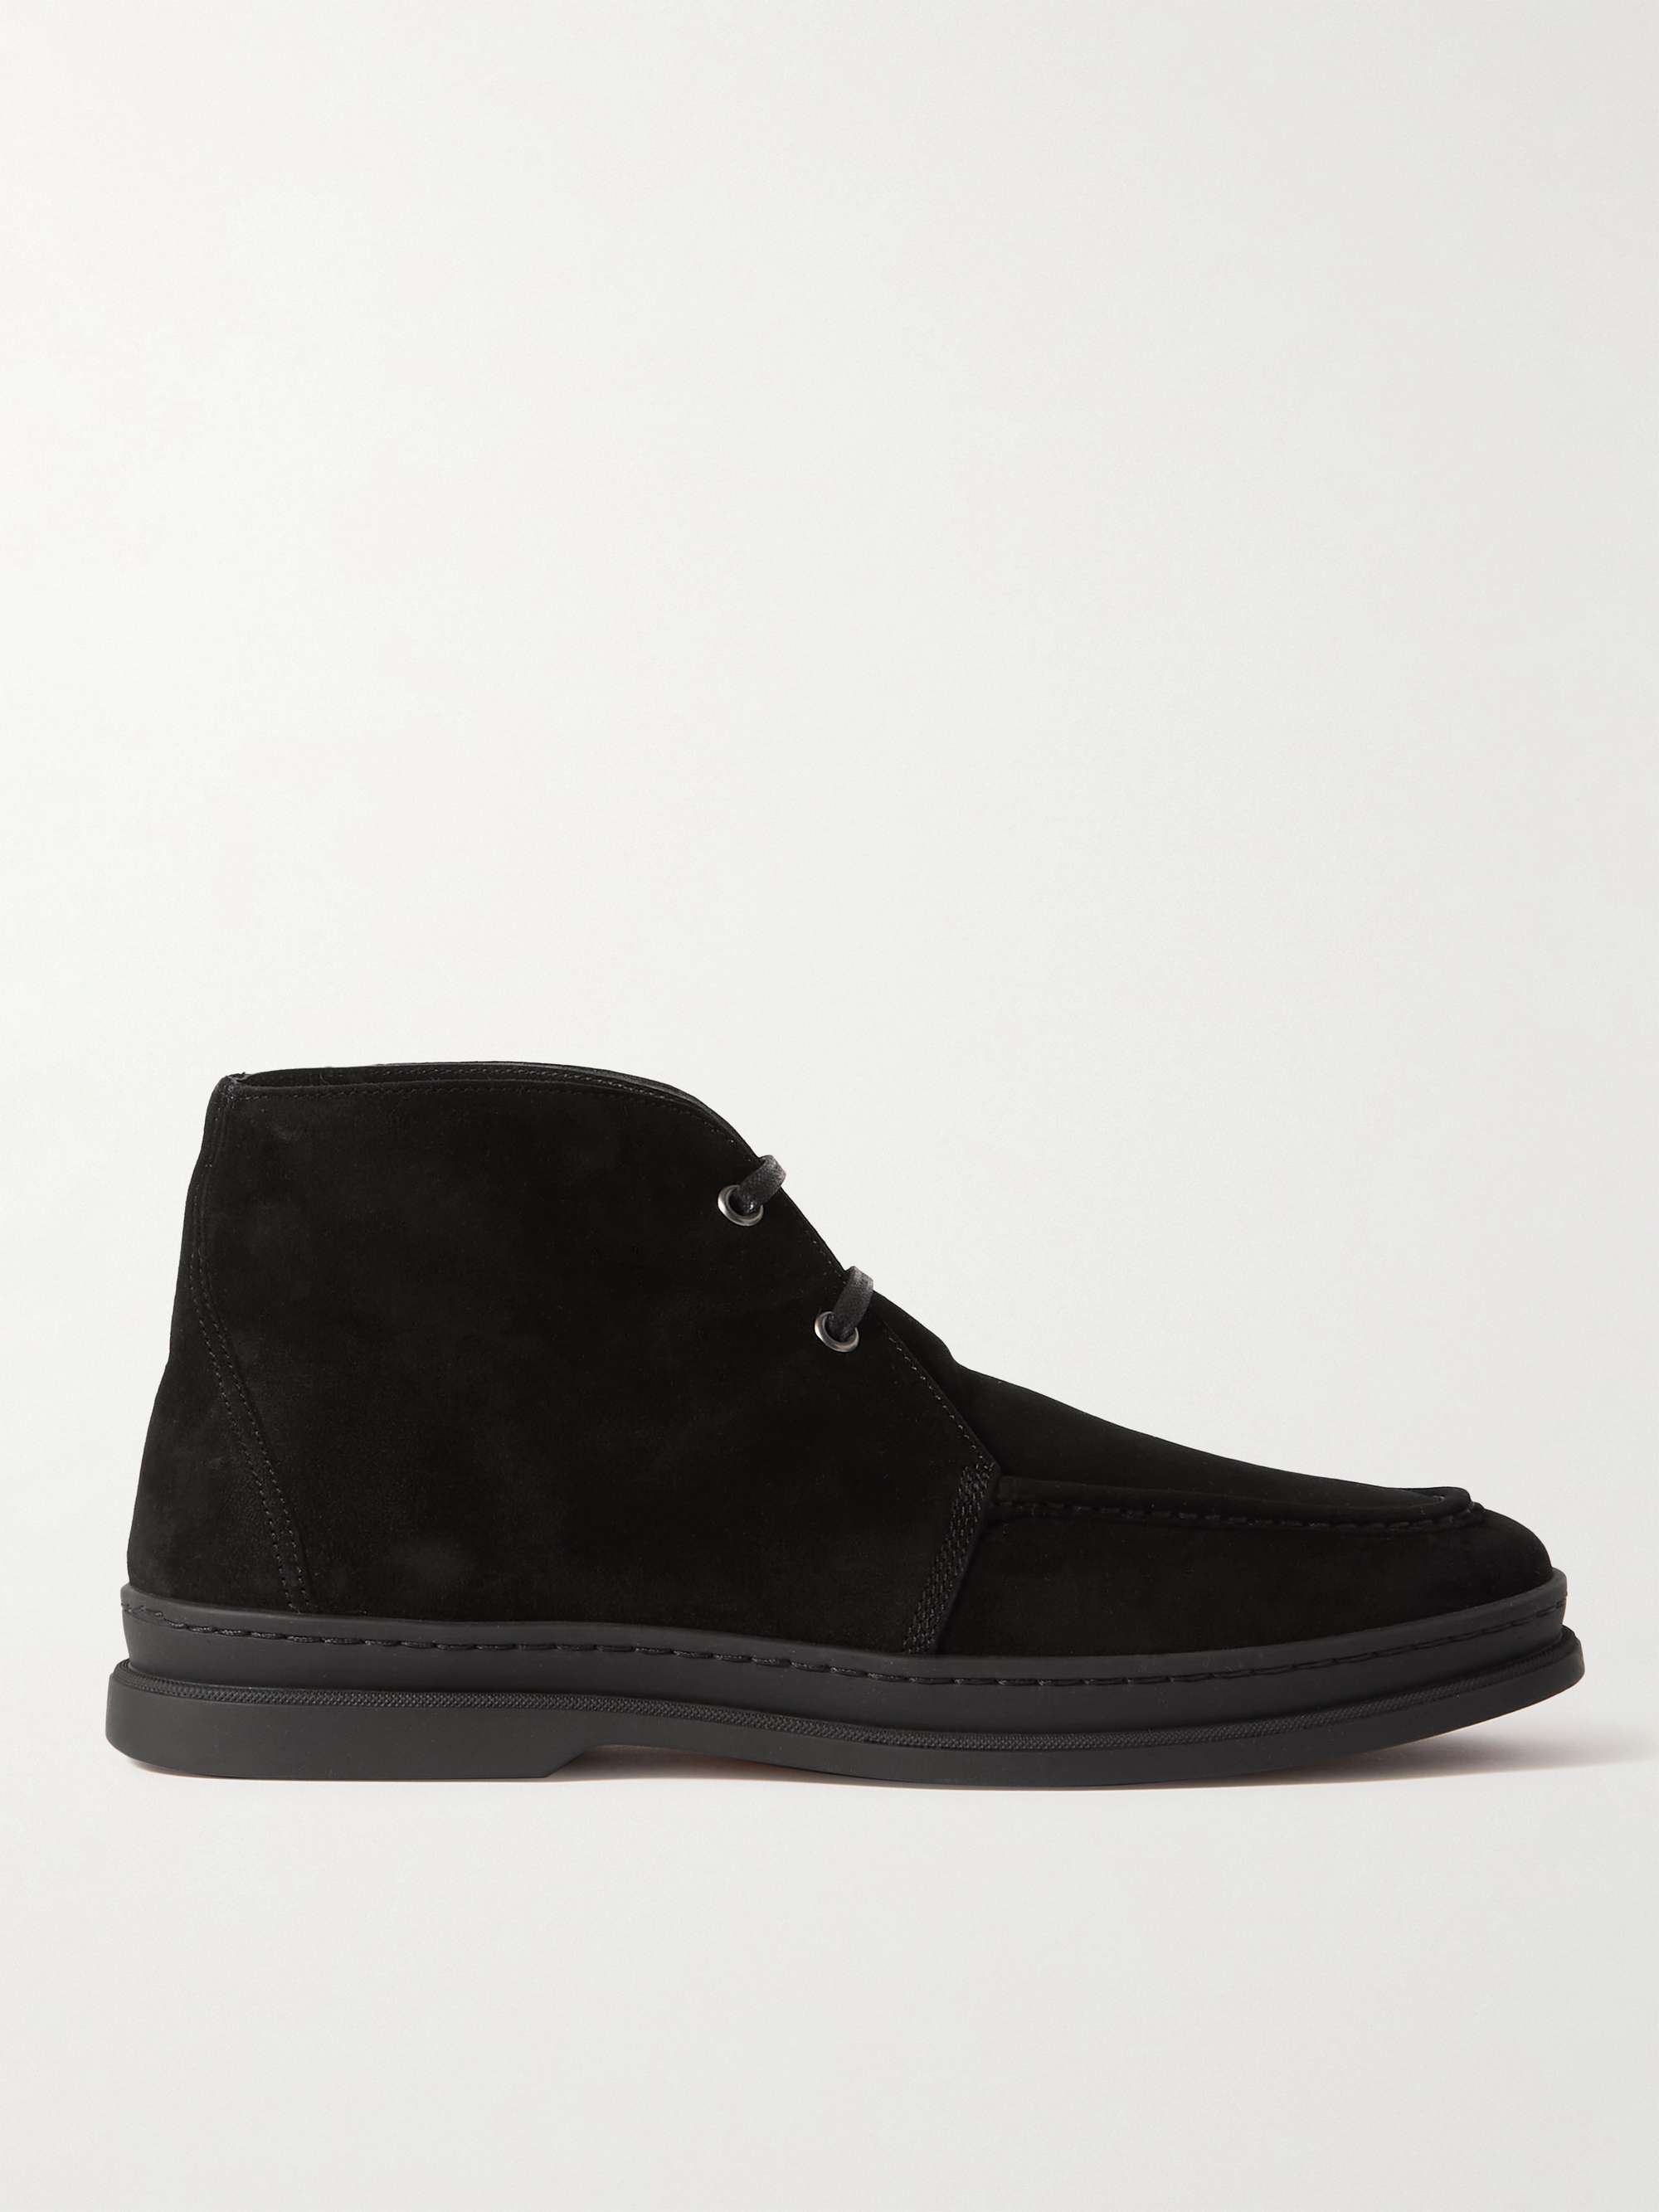 PAUL SMITH Paxton Suede Boots | MR PORTER